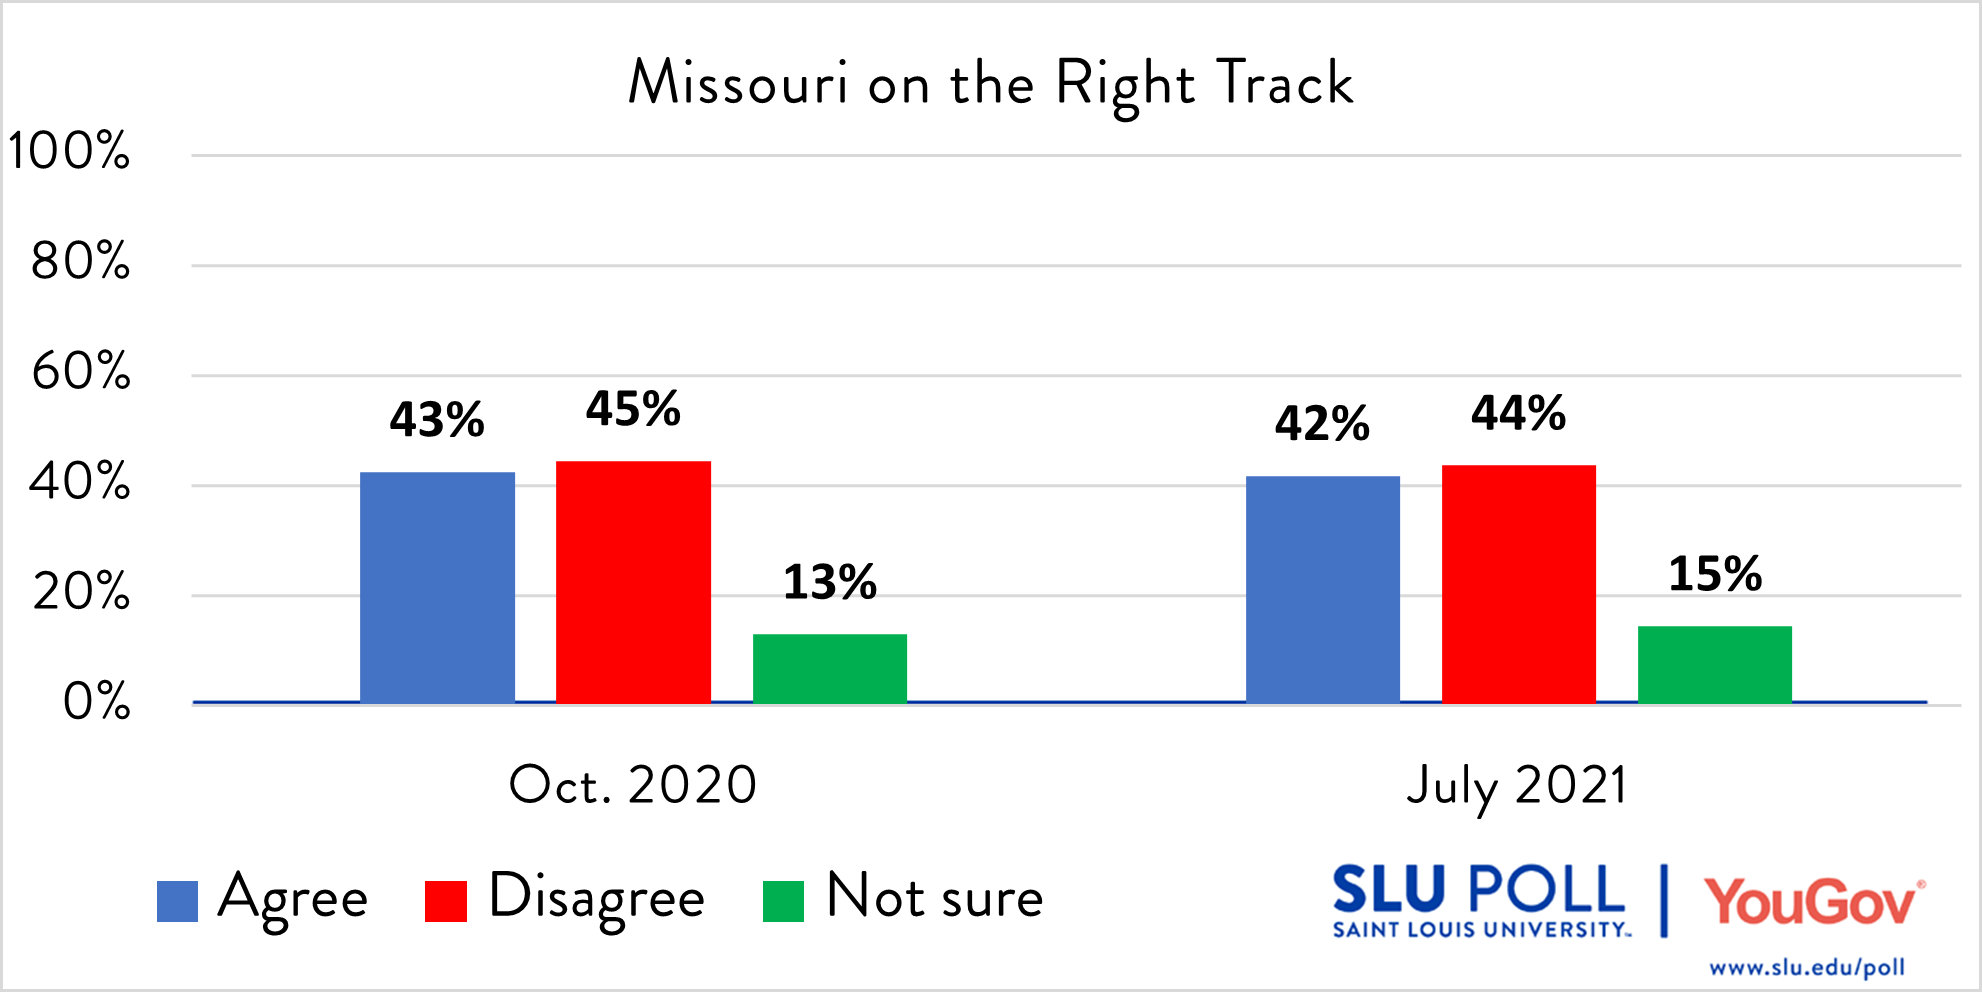 Do you agree or disagree with the following statements…The State of Missouri is on the right track and headed in a good direction? - Agree: 42% - Disagree: 44% - Not sure: 15% Subsample Question: The sample size for this question is 473. The margin of error for the full results for the above question is ± 5.81%.